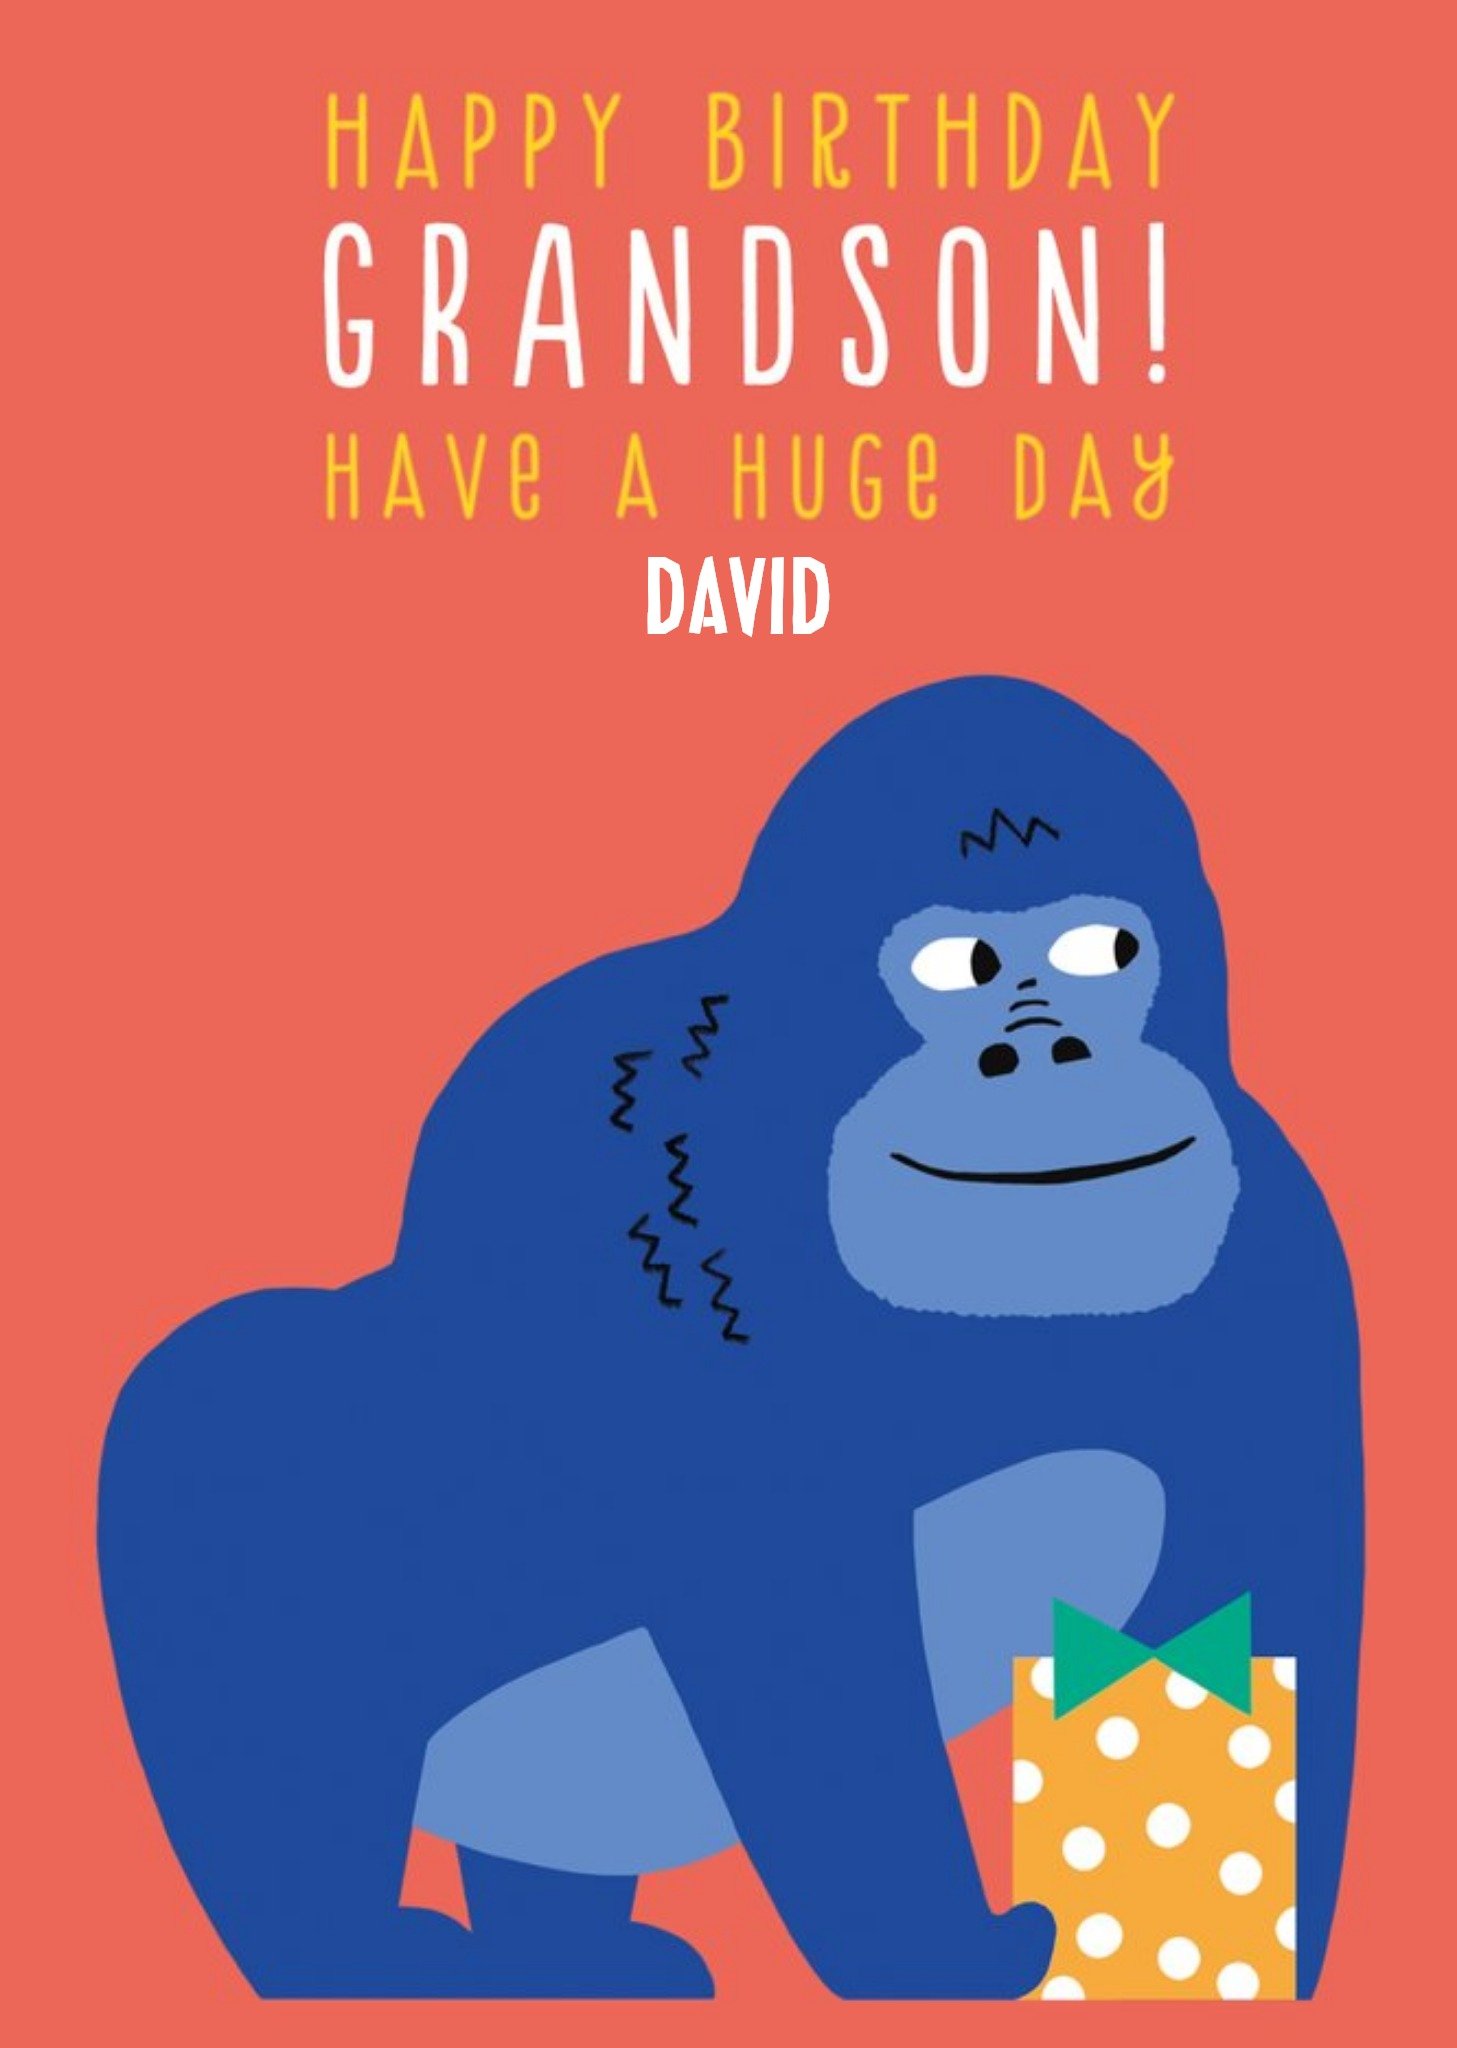 Moonpig Illustration Of A Gorilla With A Present Grandson's Birthday Card, Large